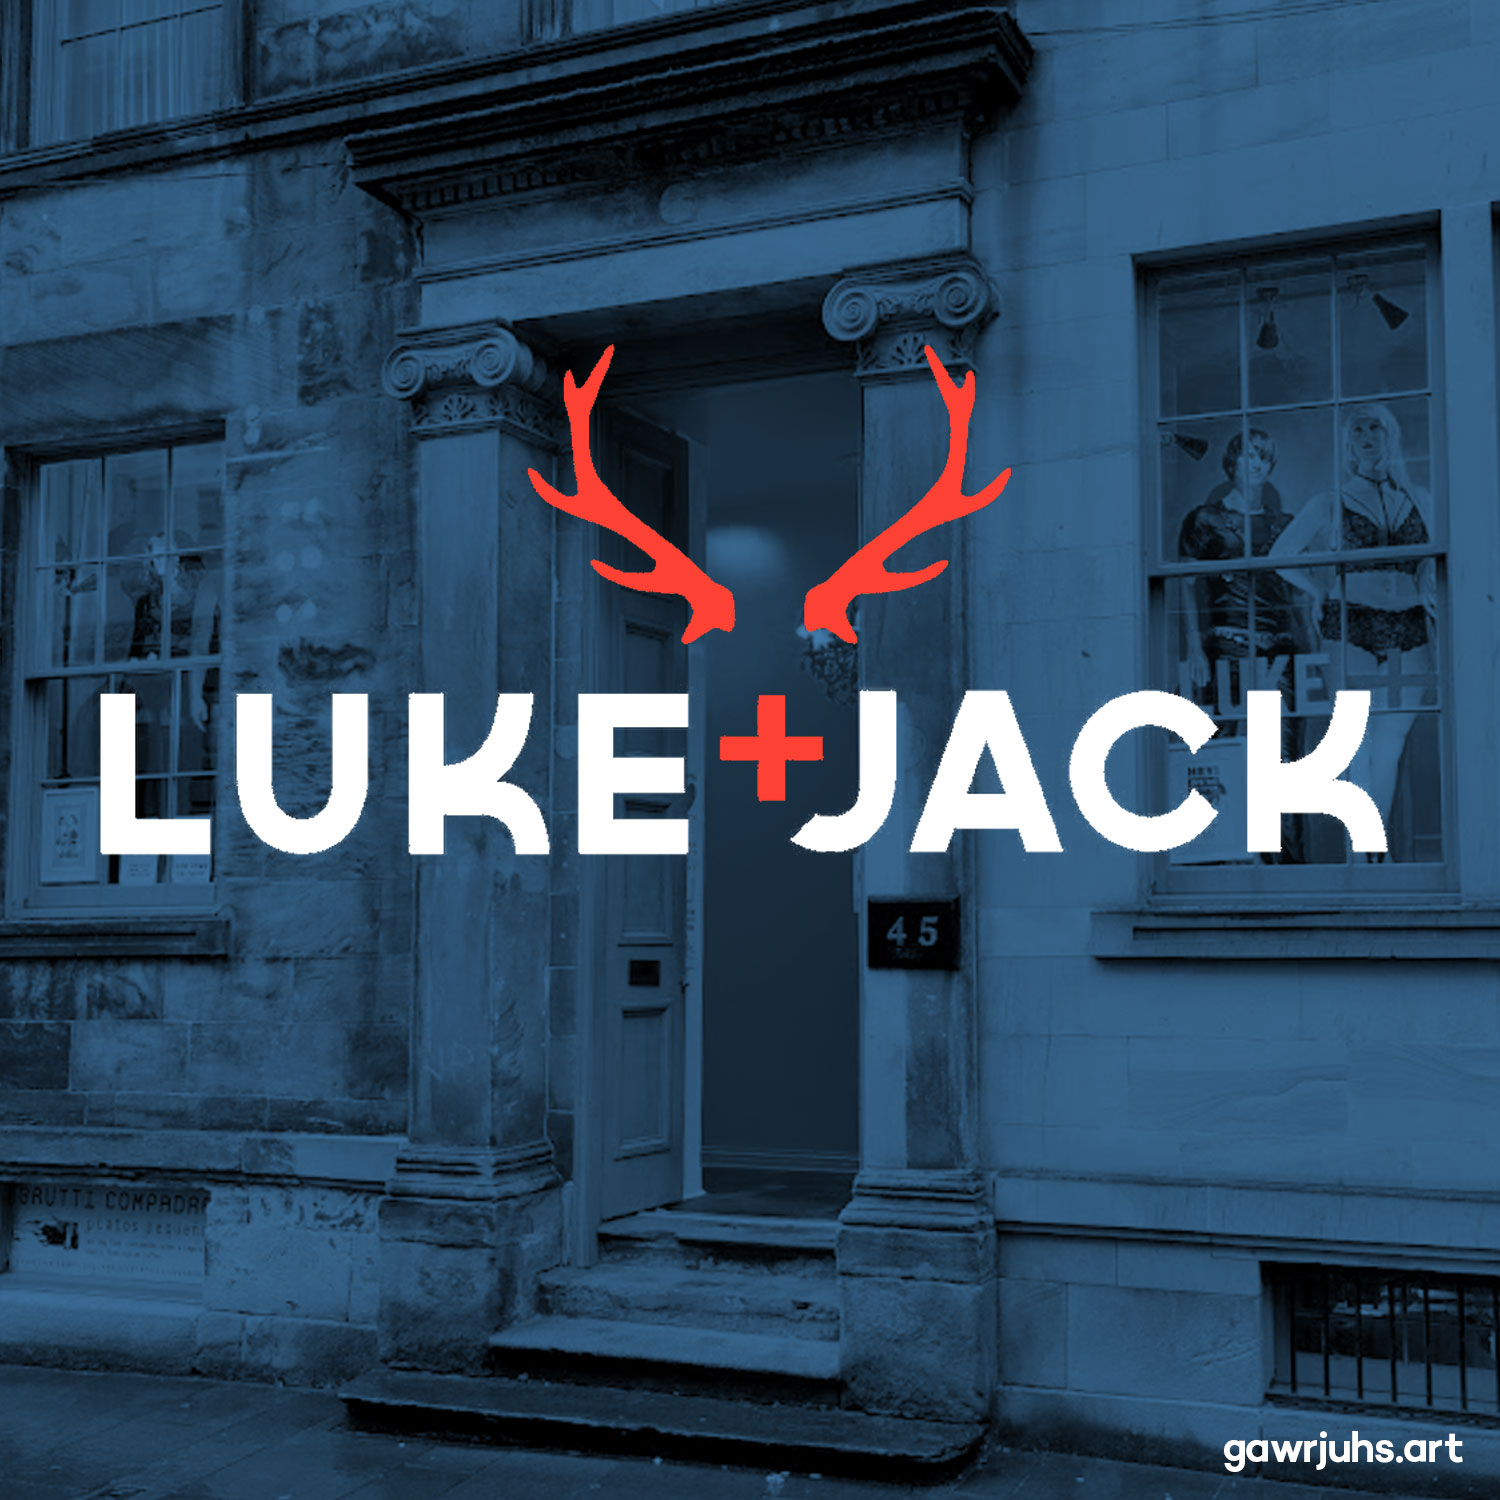 luke-and-jack-logo-and-store-front-glasgow